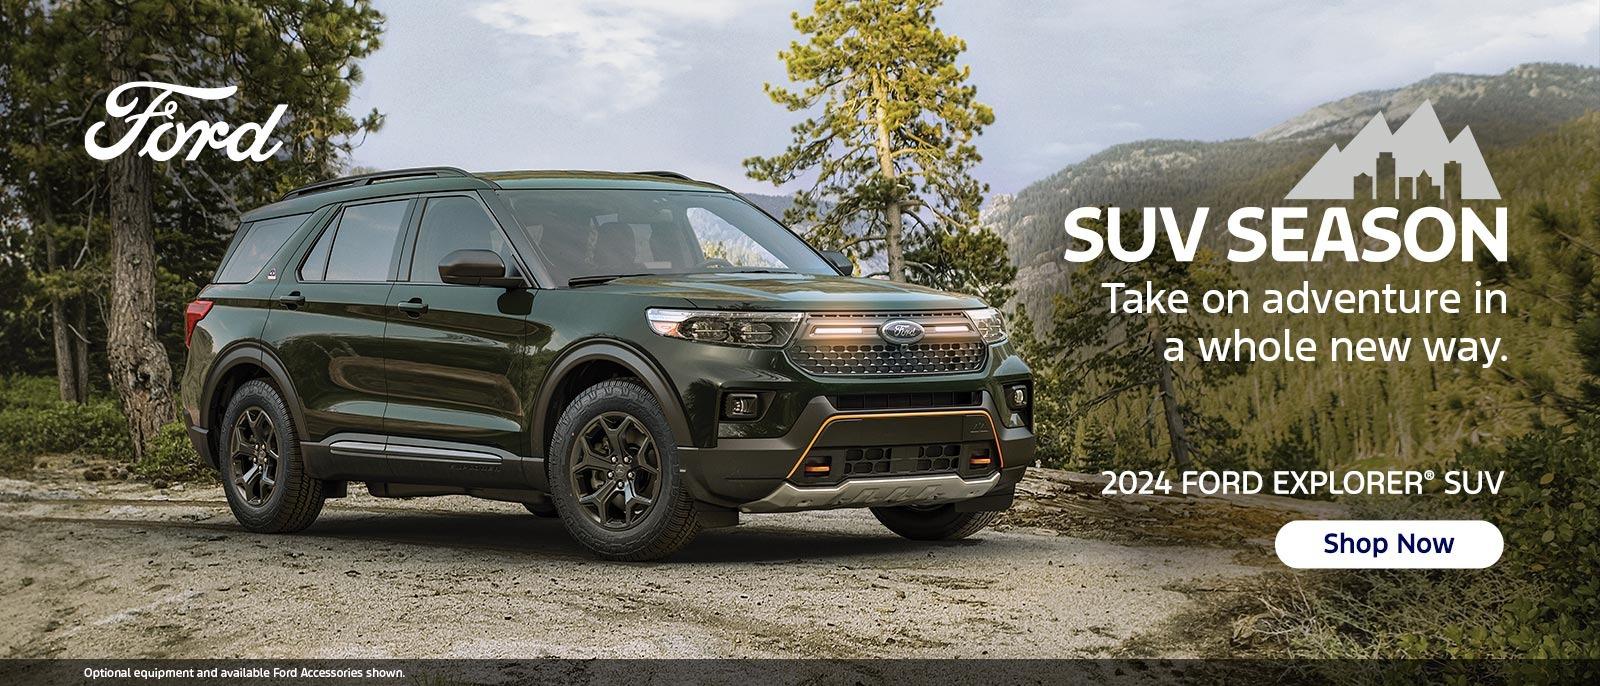 Take on adventure in a whole new way.